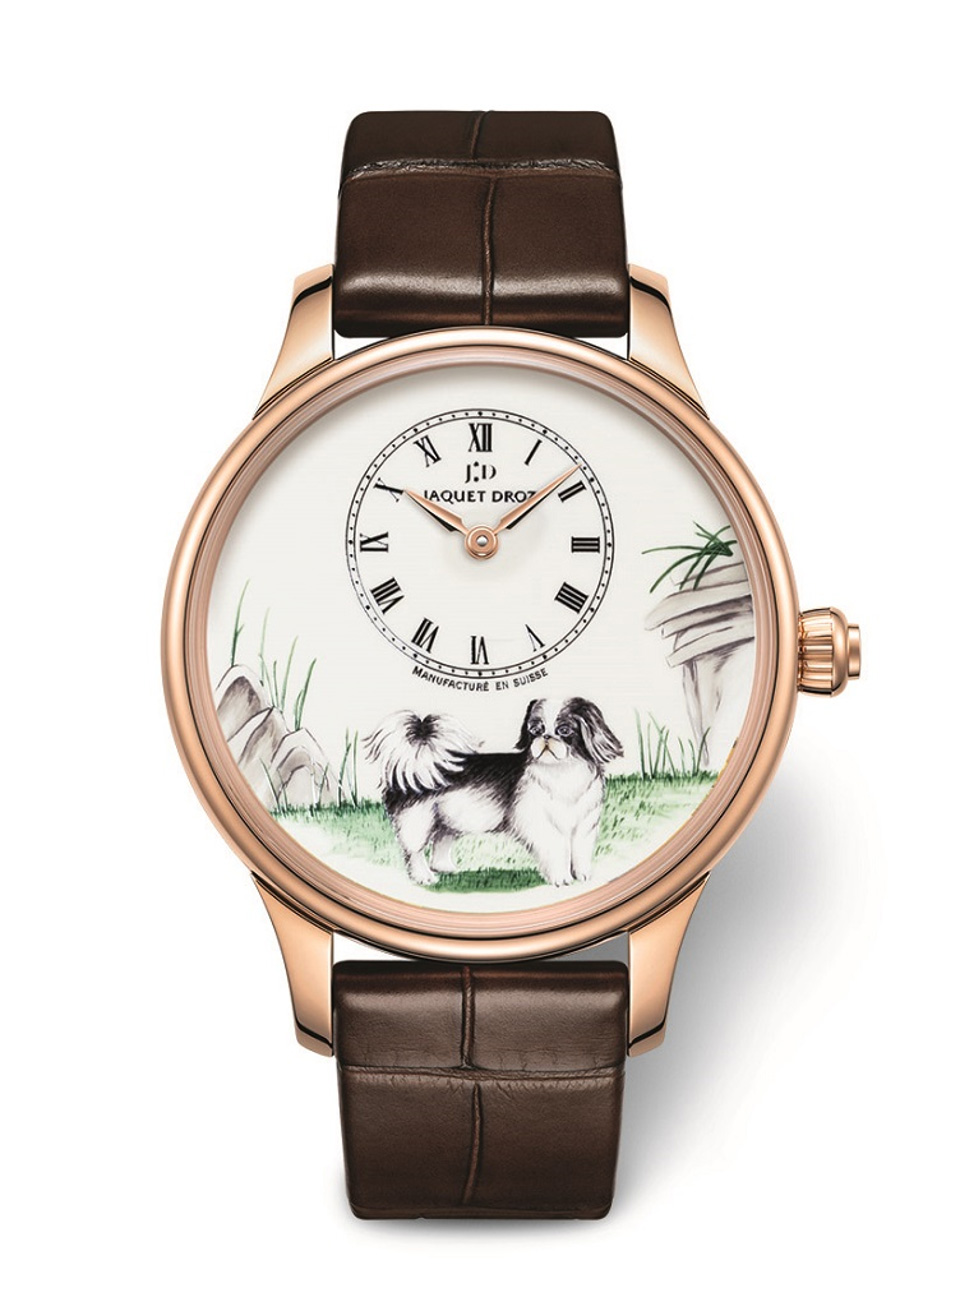 Limited to 28 pieces each, the Petite Heure Minute Dog and the Petite Heure Minute Relief Dog are a true representation of the traditional Chinese folklore. Inspired by nature, the two variations are gender-neutral timepieces. 